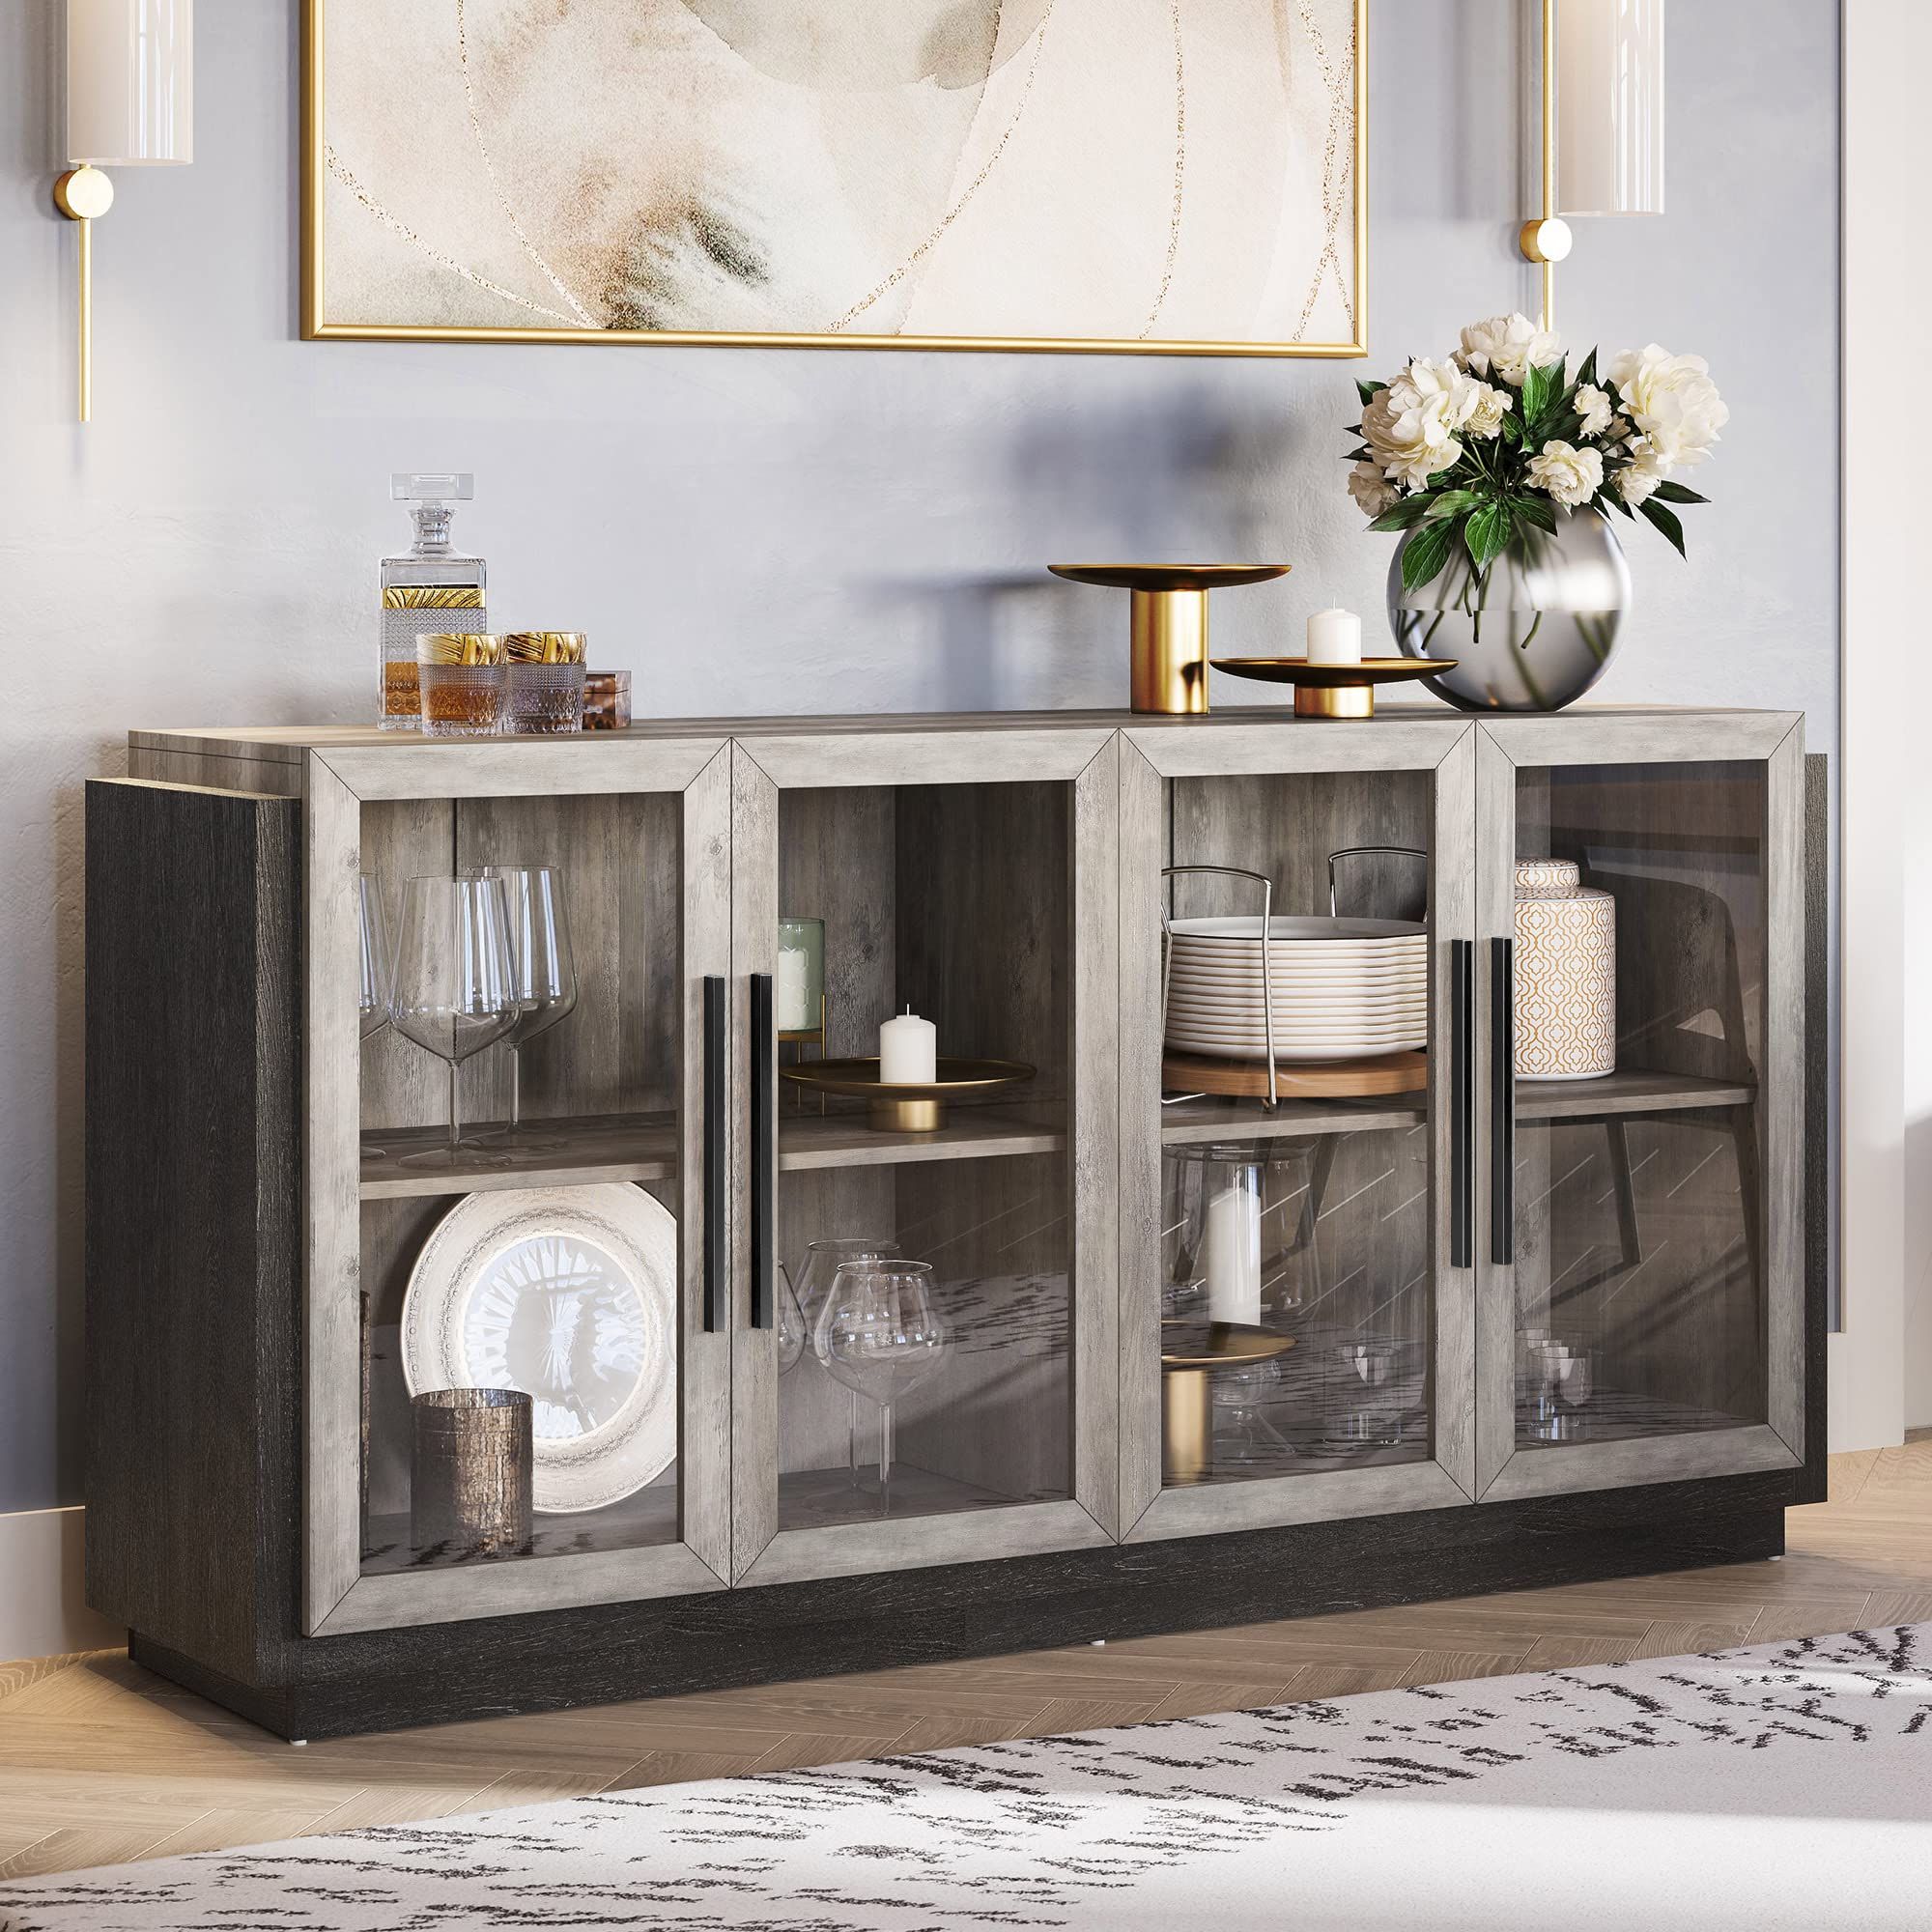 Sideboard Buffet Cabinets Intended For Most Up To Date Amazon: Belleze Sideboard Buffet Cabinet, Modern Wood Glass  Buffet Sideboard With Storage, Console Table For Kitchen, Dining Room,  Living Room, Hallway, Or Entrance – Brixston (grey) : Home & Kitchen (View 2 of 10)